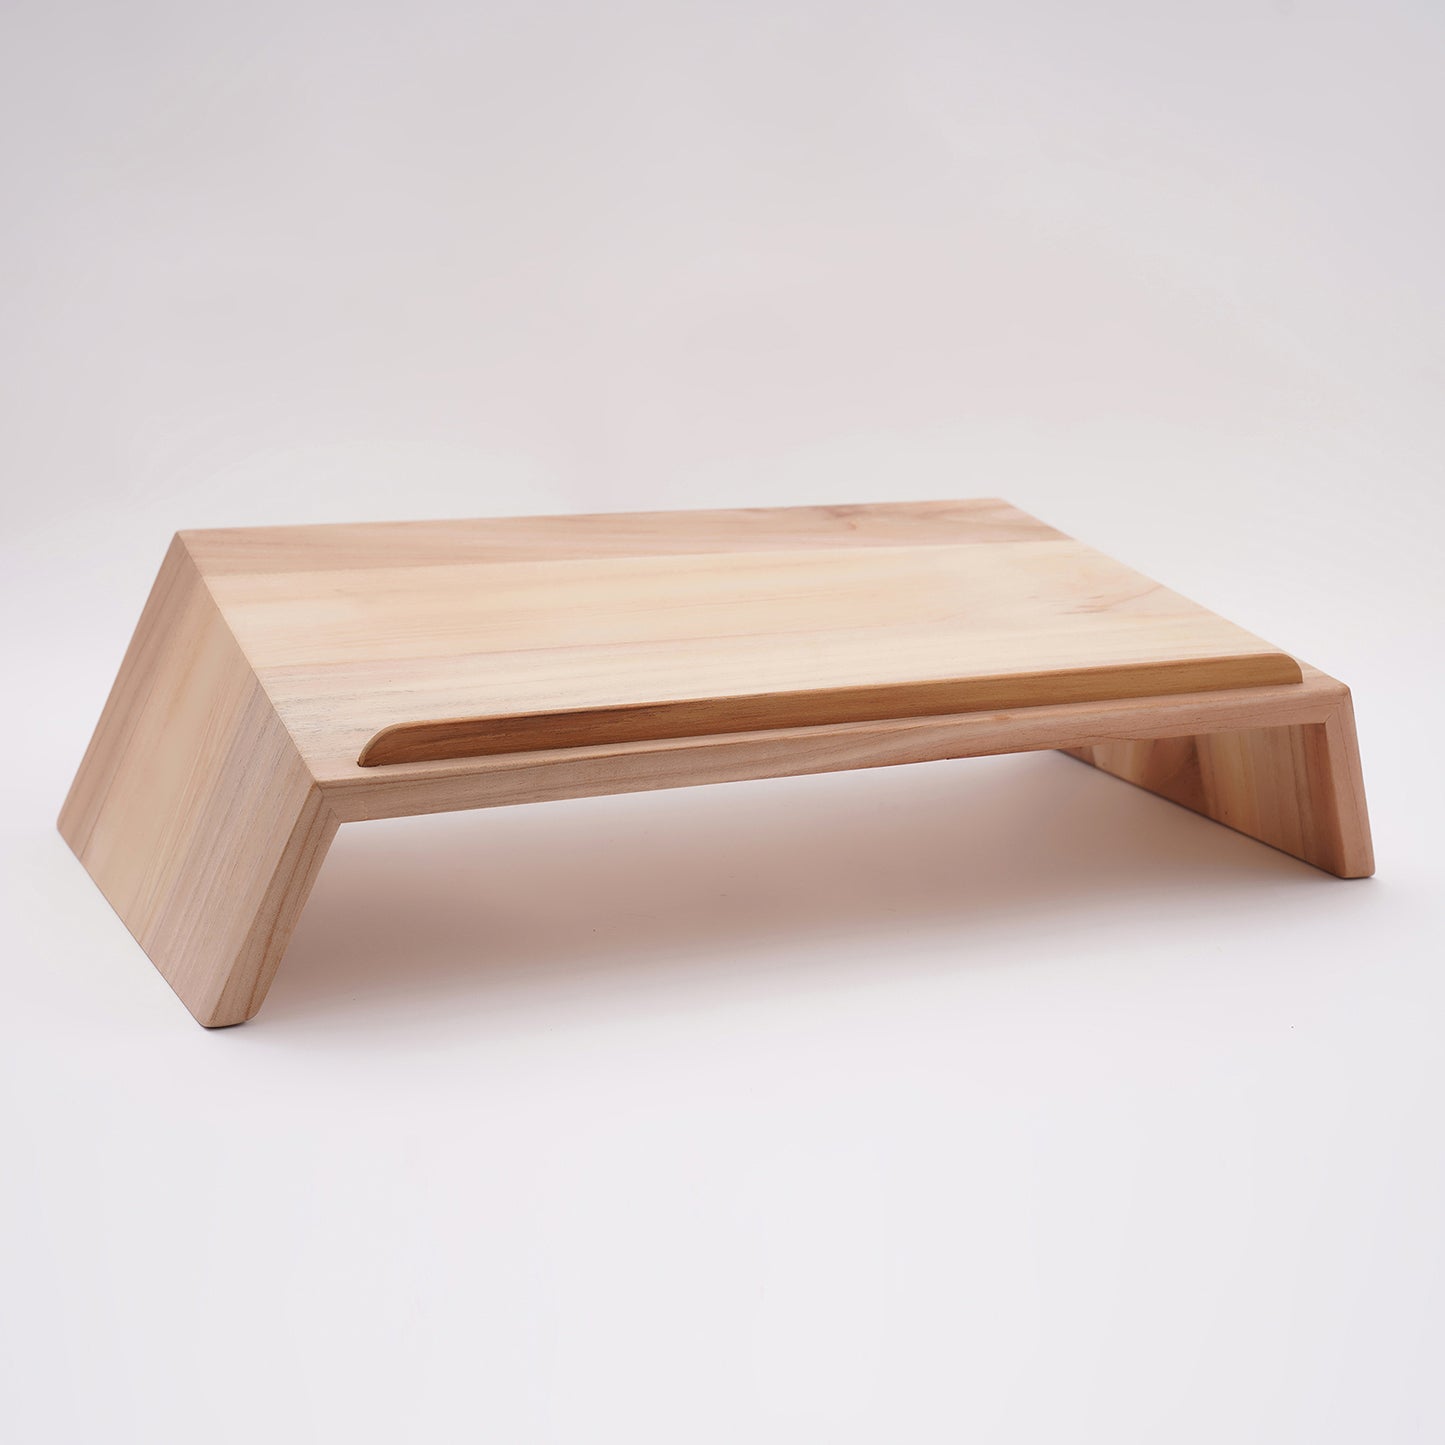 Combine elegance and practicality with a wooden MacBook stand, a premium accessory for a classy setup